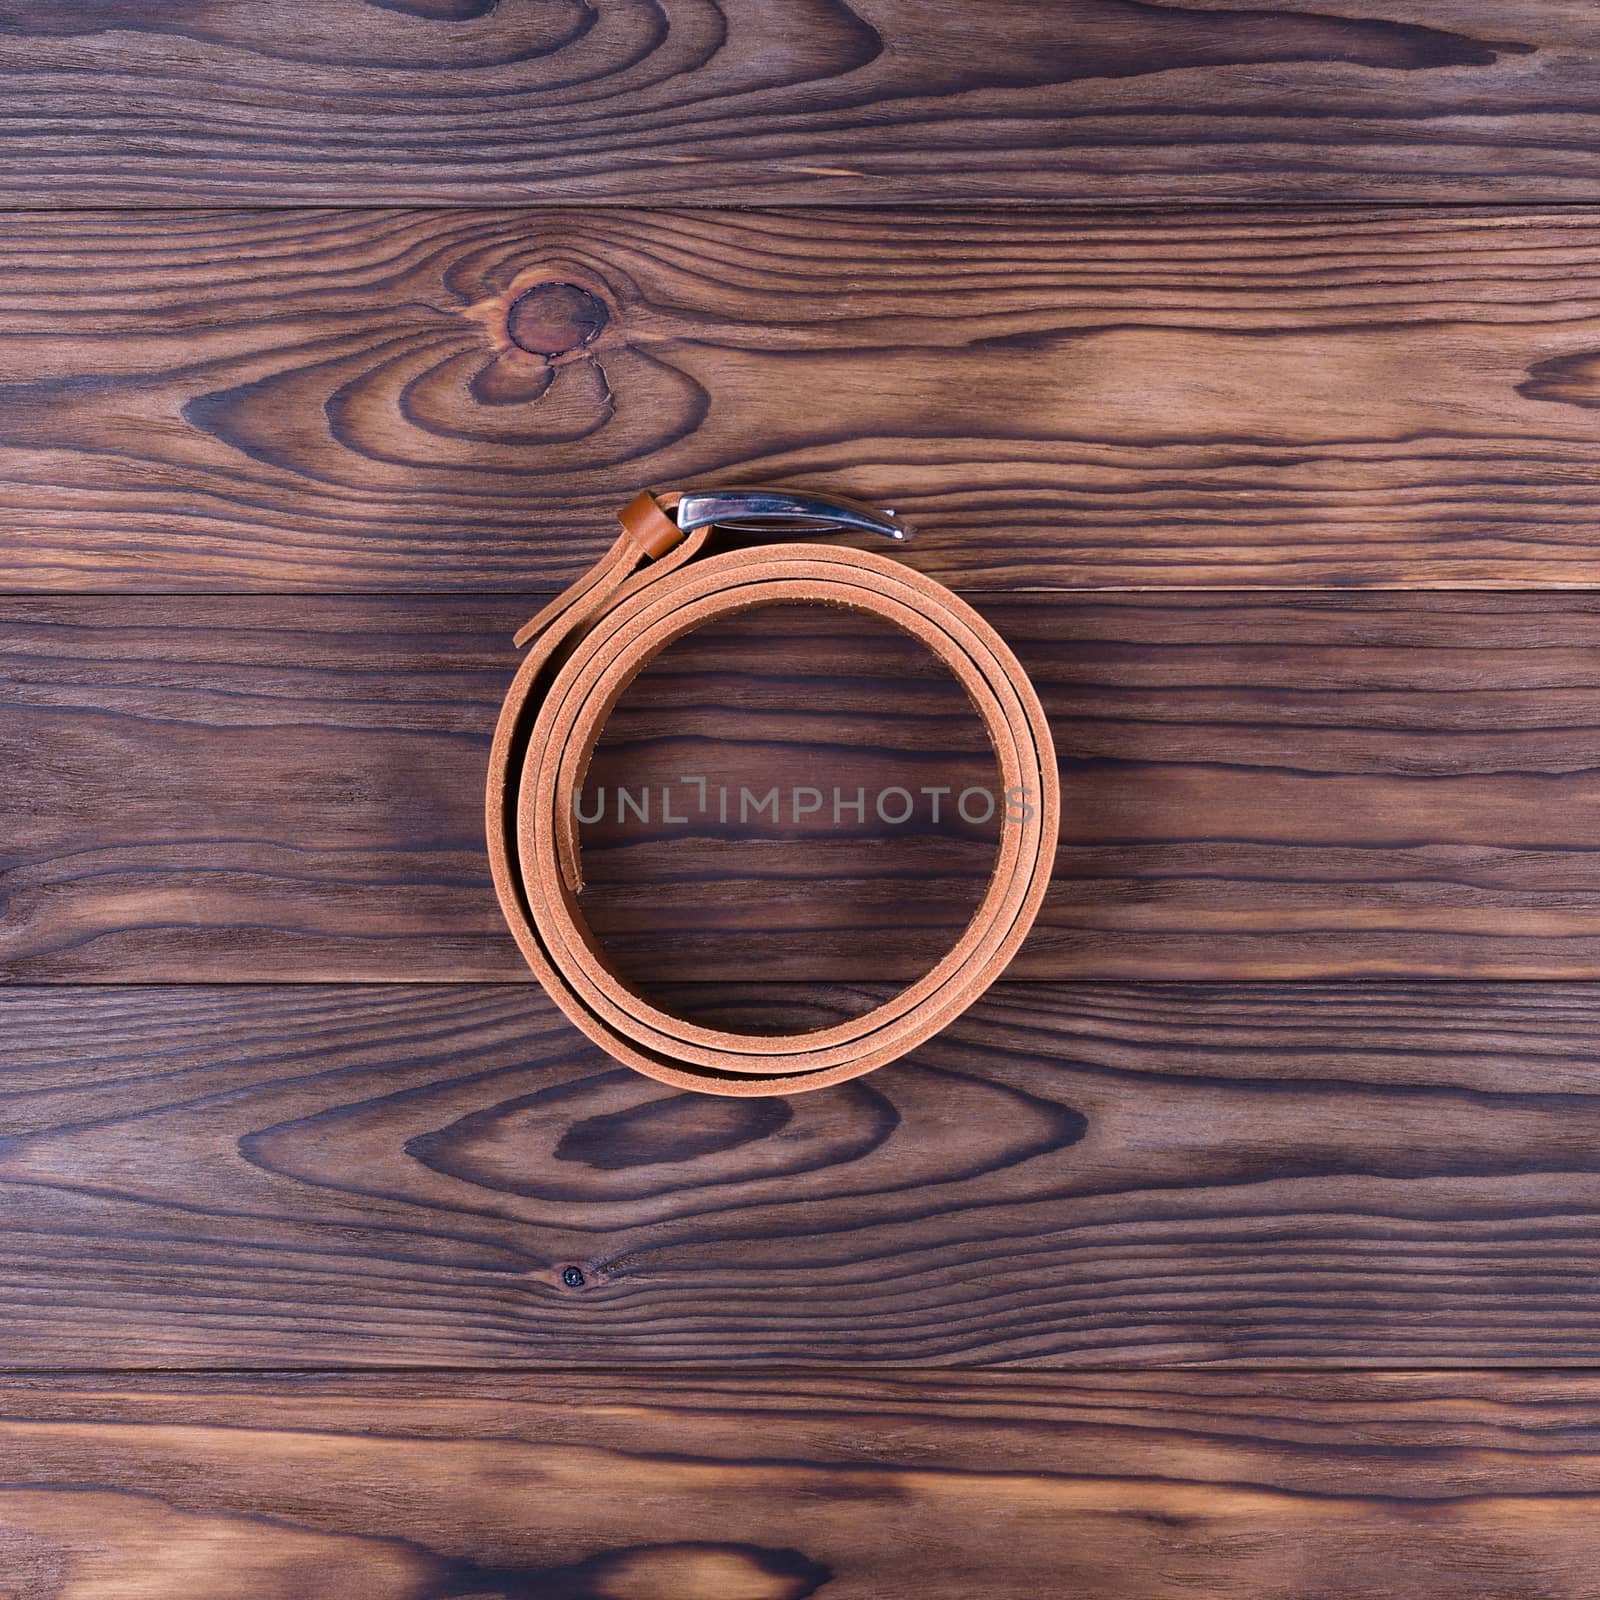 Hue ginger color handmade belt lies on textured wooden background. The belt is twisted into a ring. Up to down view. Stock photo of businessman accessories.